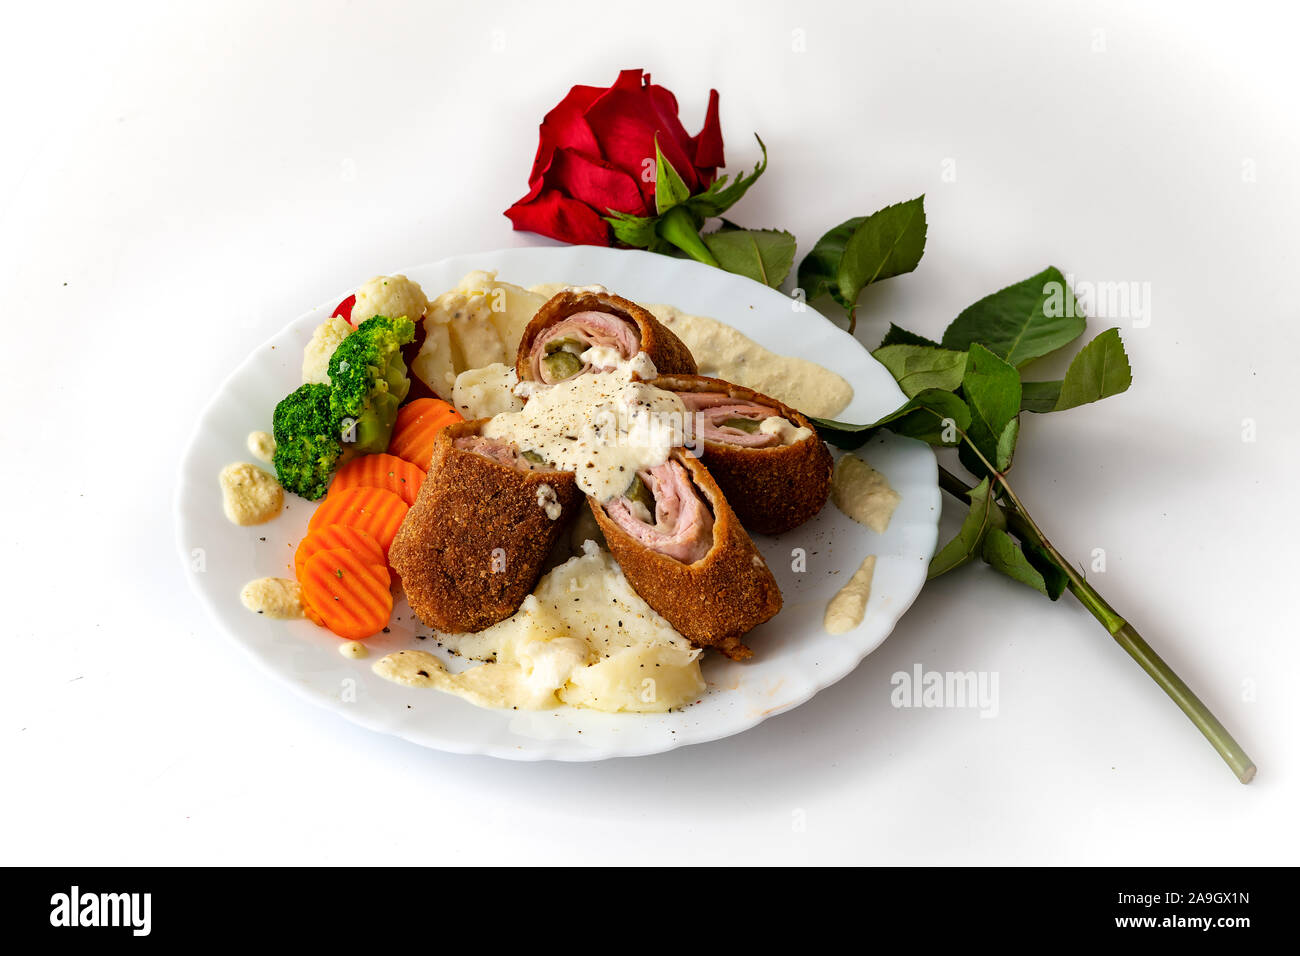 Karadjordjeva steak, it is a rolled veal or pork schnitzel,  with mashed pettitoes, boiled vegetables, Alfredo sauce  and a red rose as a decoration Stock Photo